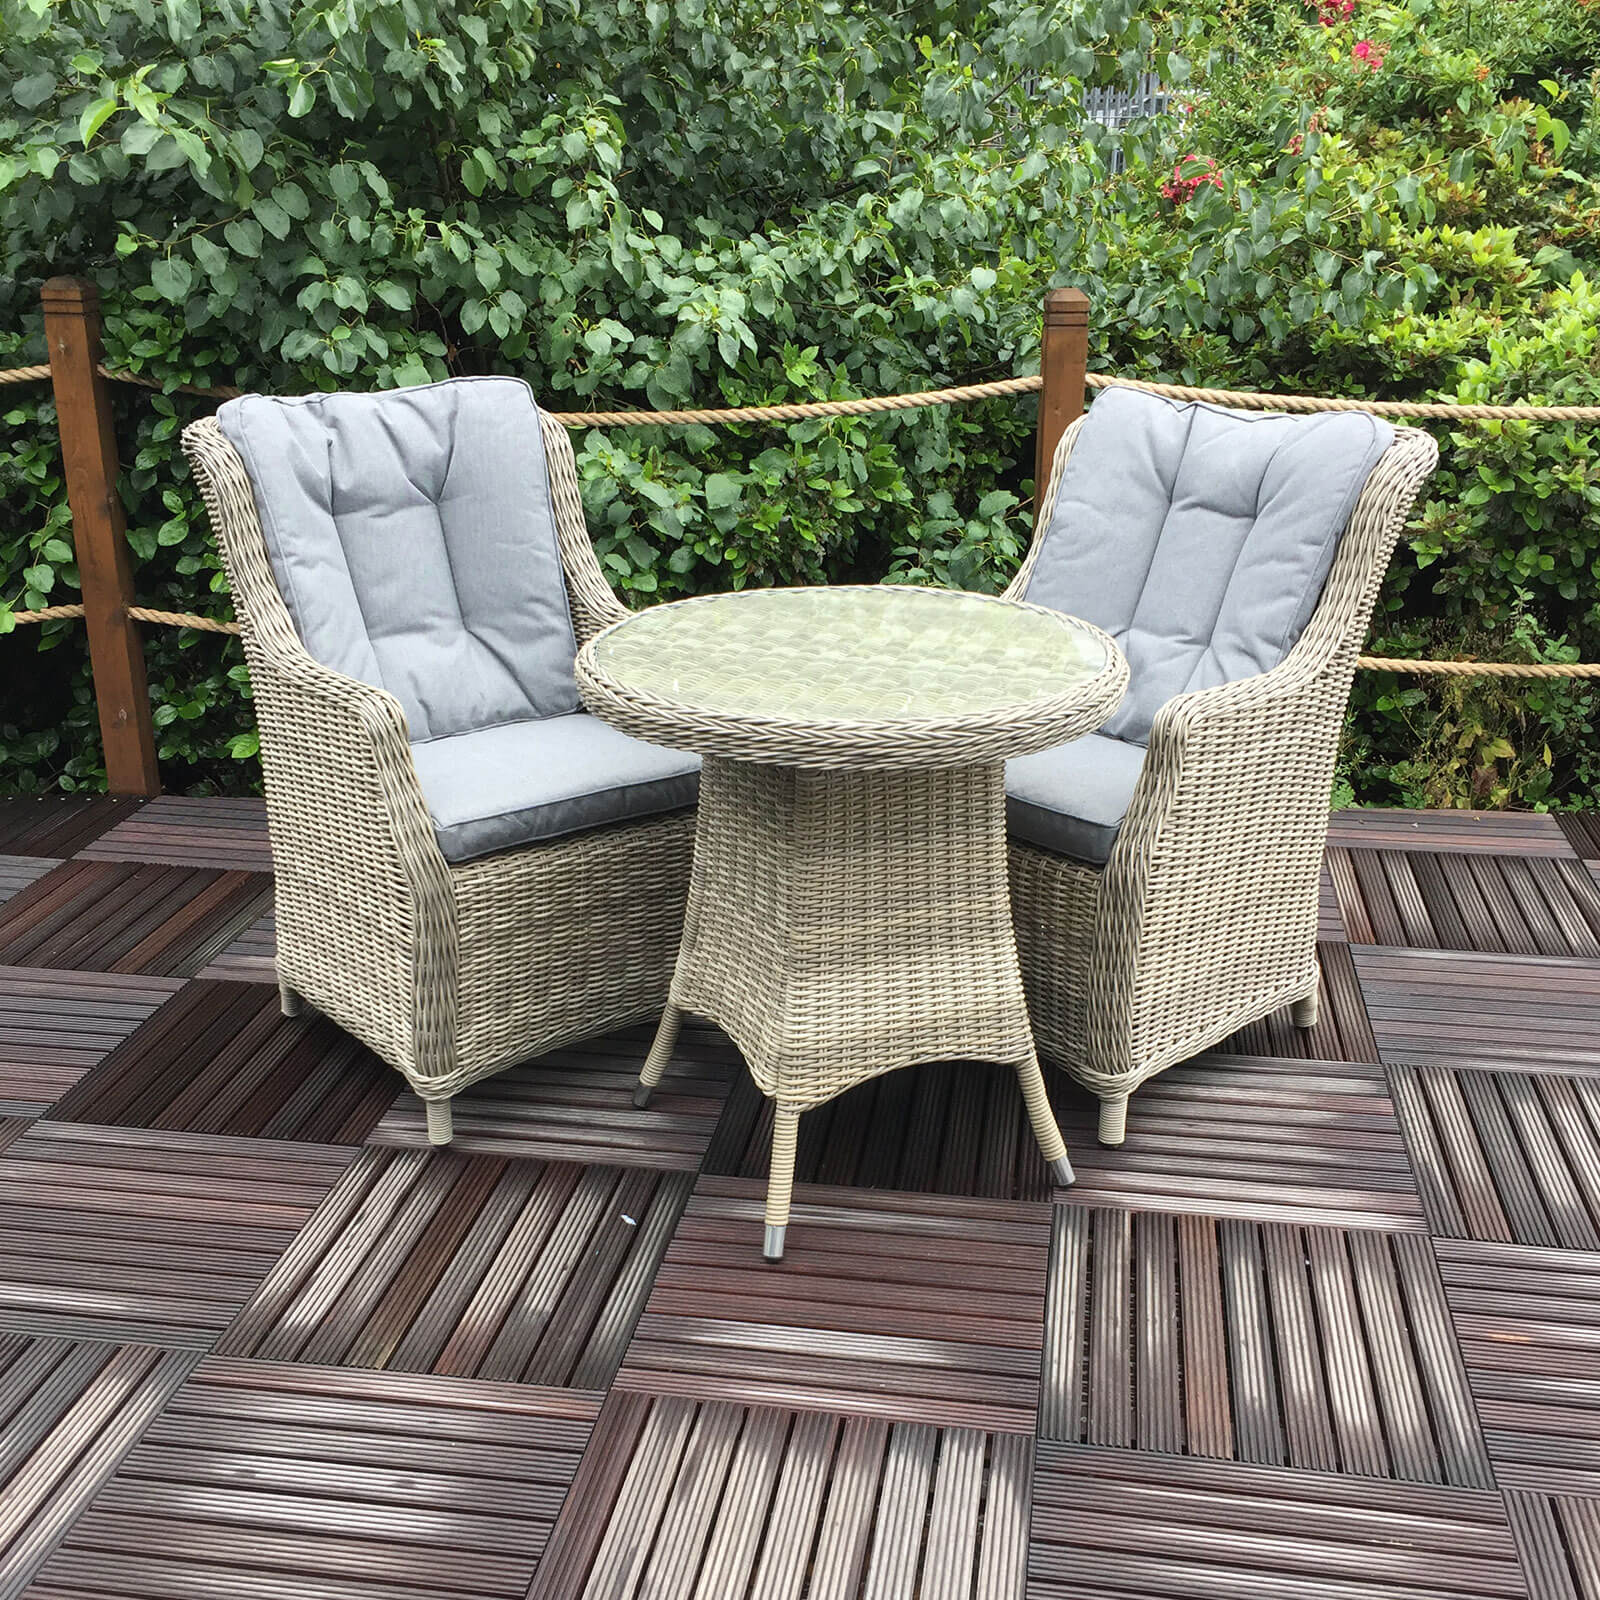 Ballintoy 2 seat round bistro set for the garden or patio area with 2 highback armchairs and round bistro table in beige rattan and grey cushions in a garden setting